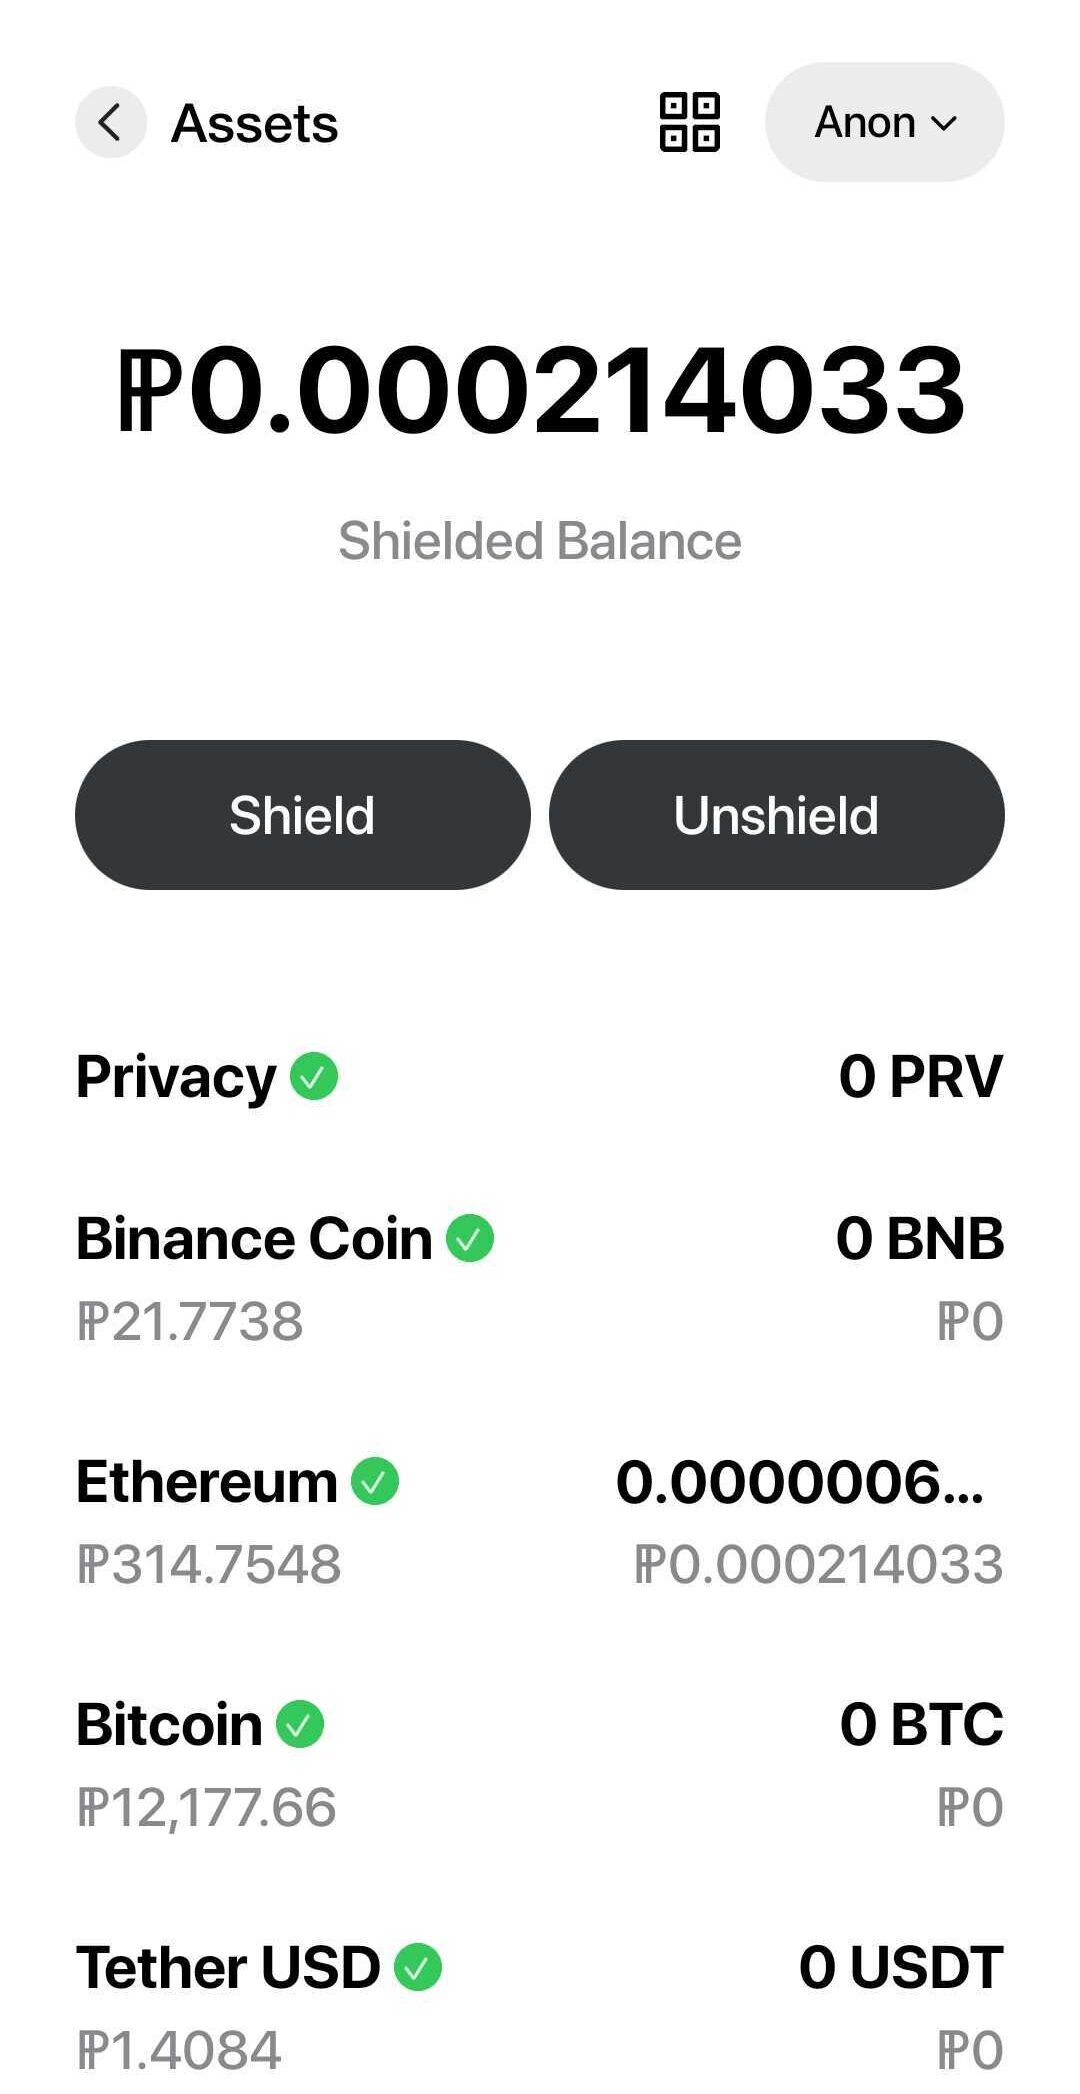 The assets view of the app